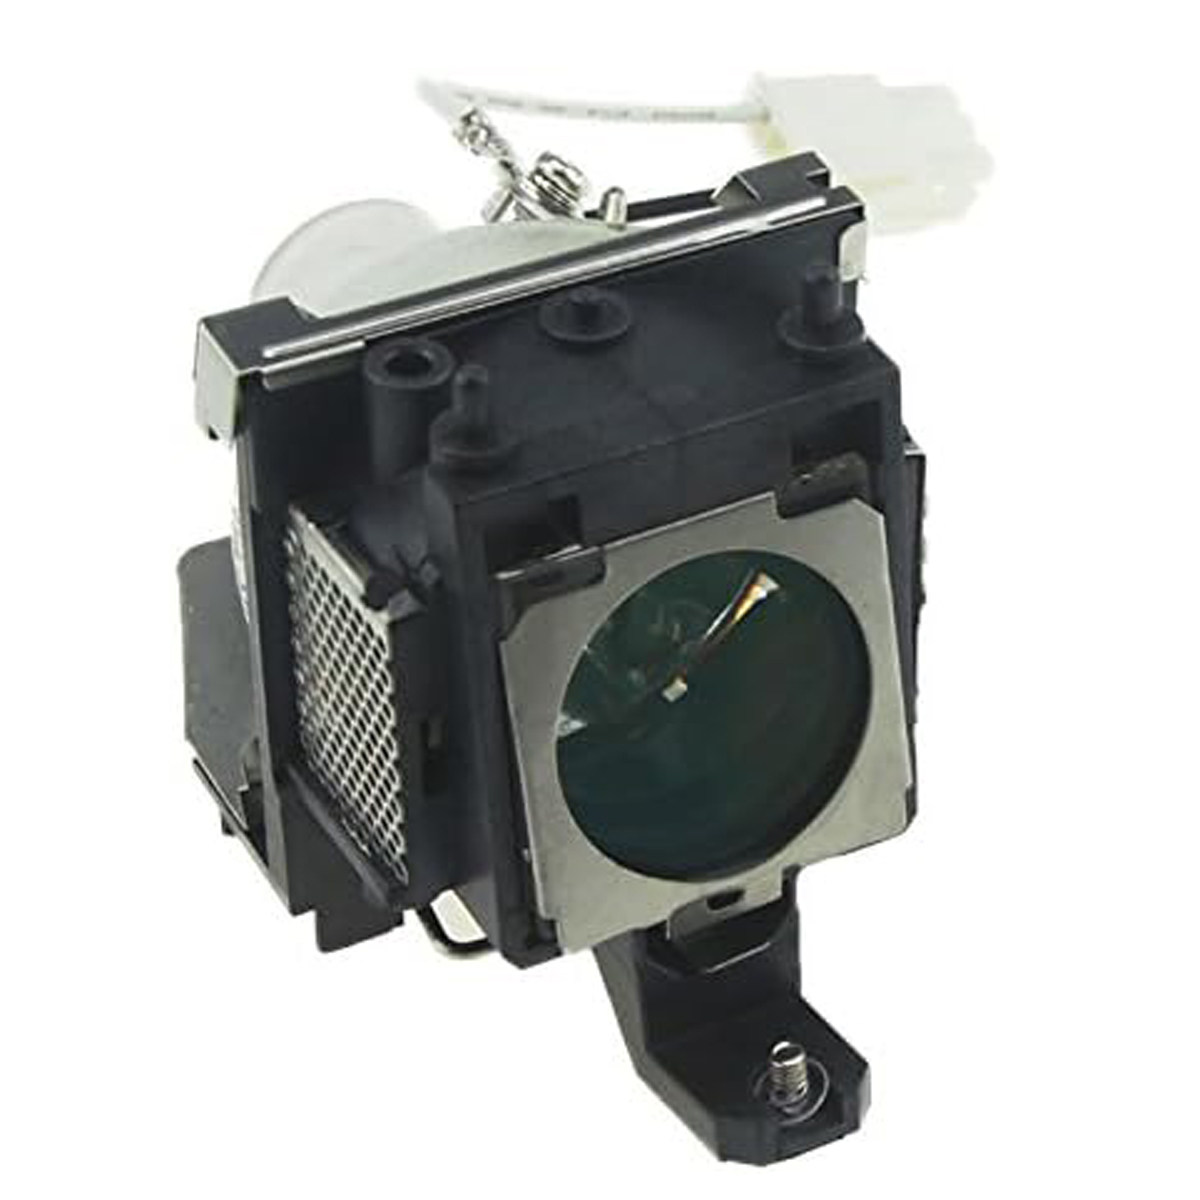 Replacement Projector lamp 5J.J1S01.001 For MP610 MP610-B5A MP620P